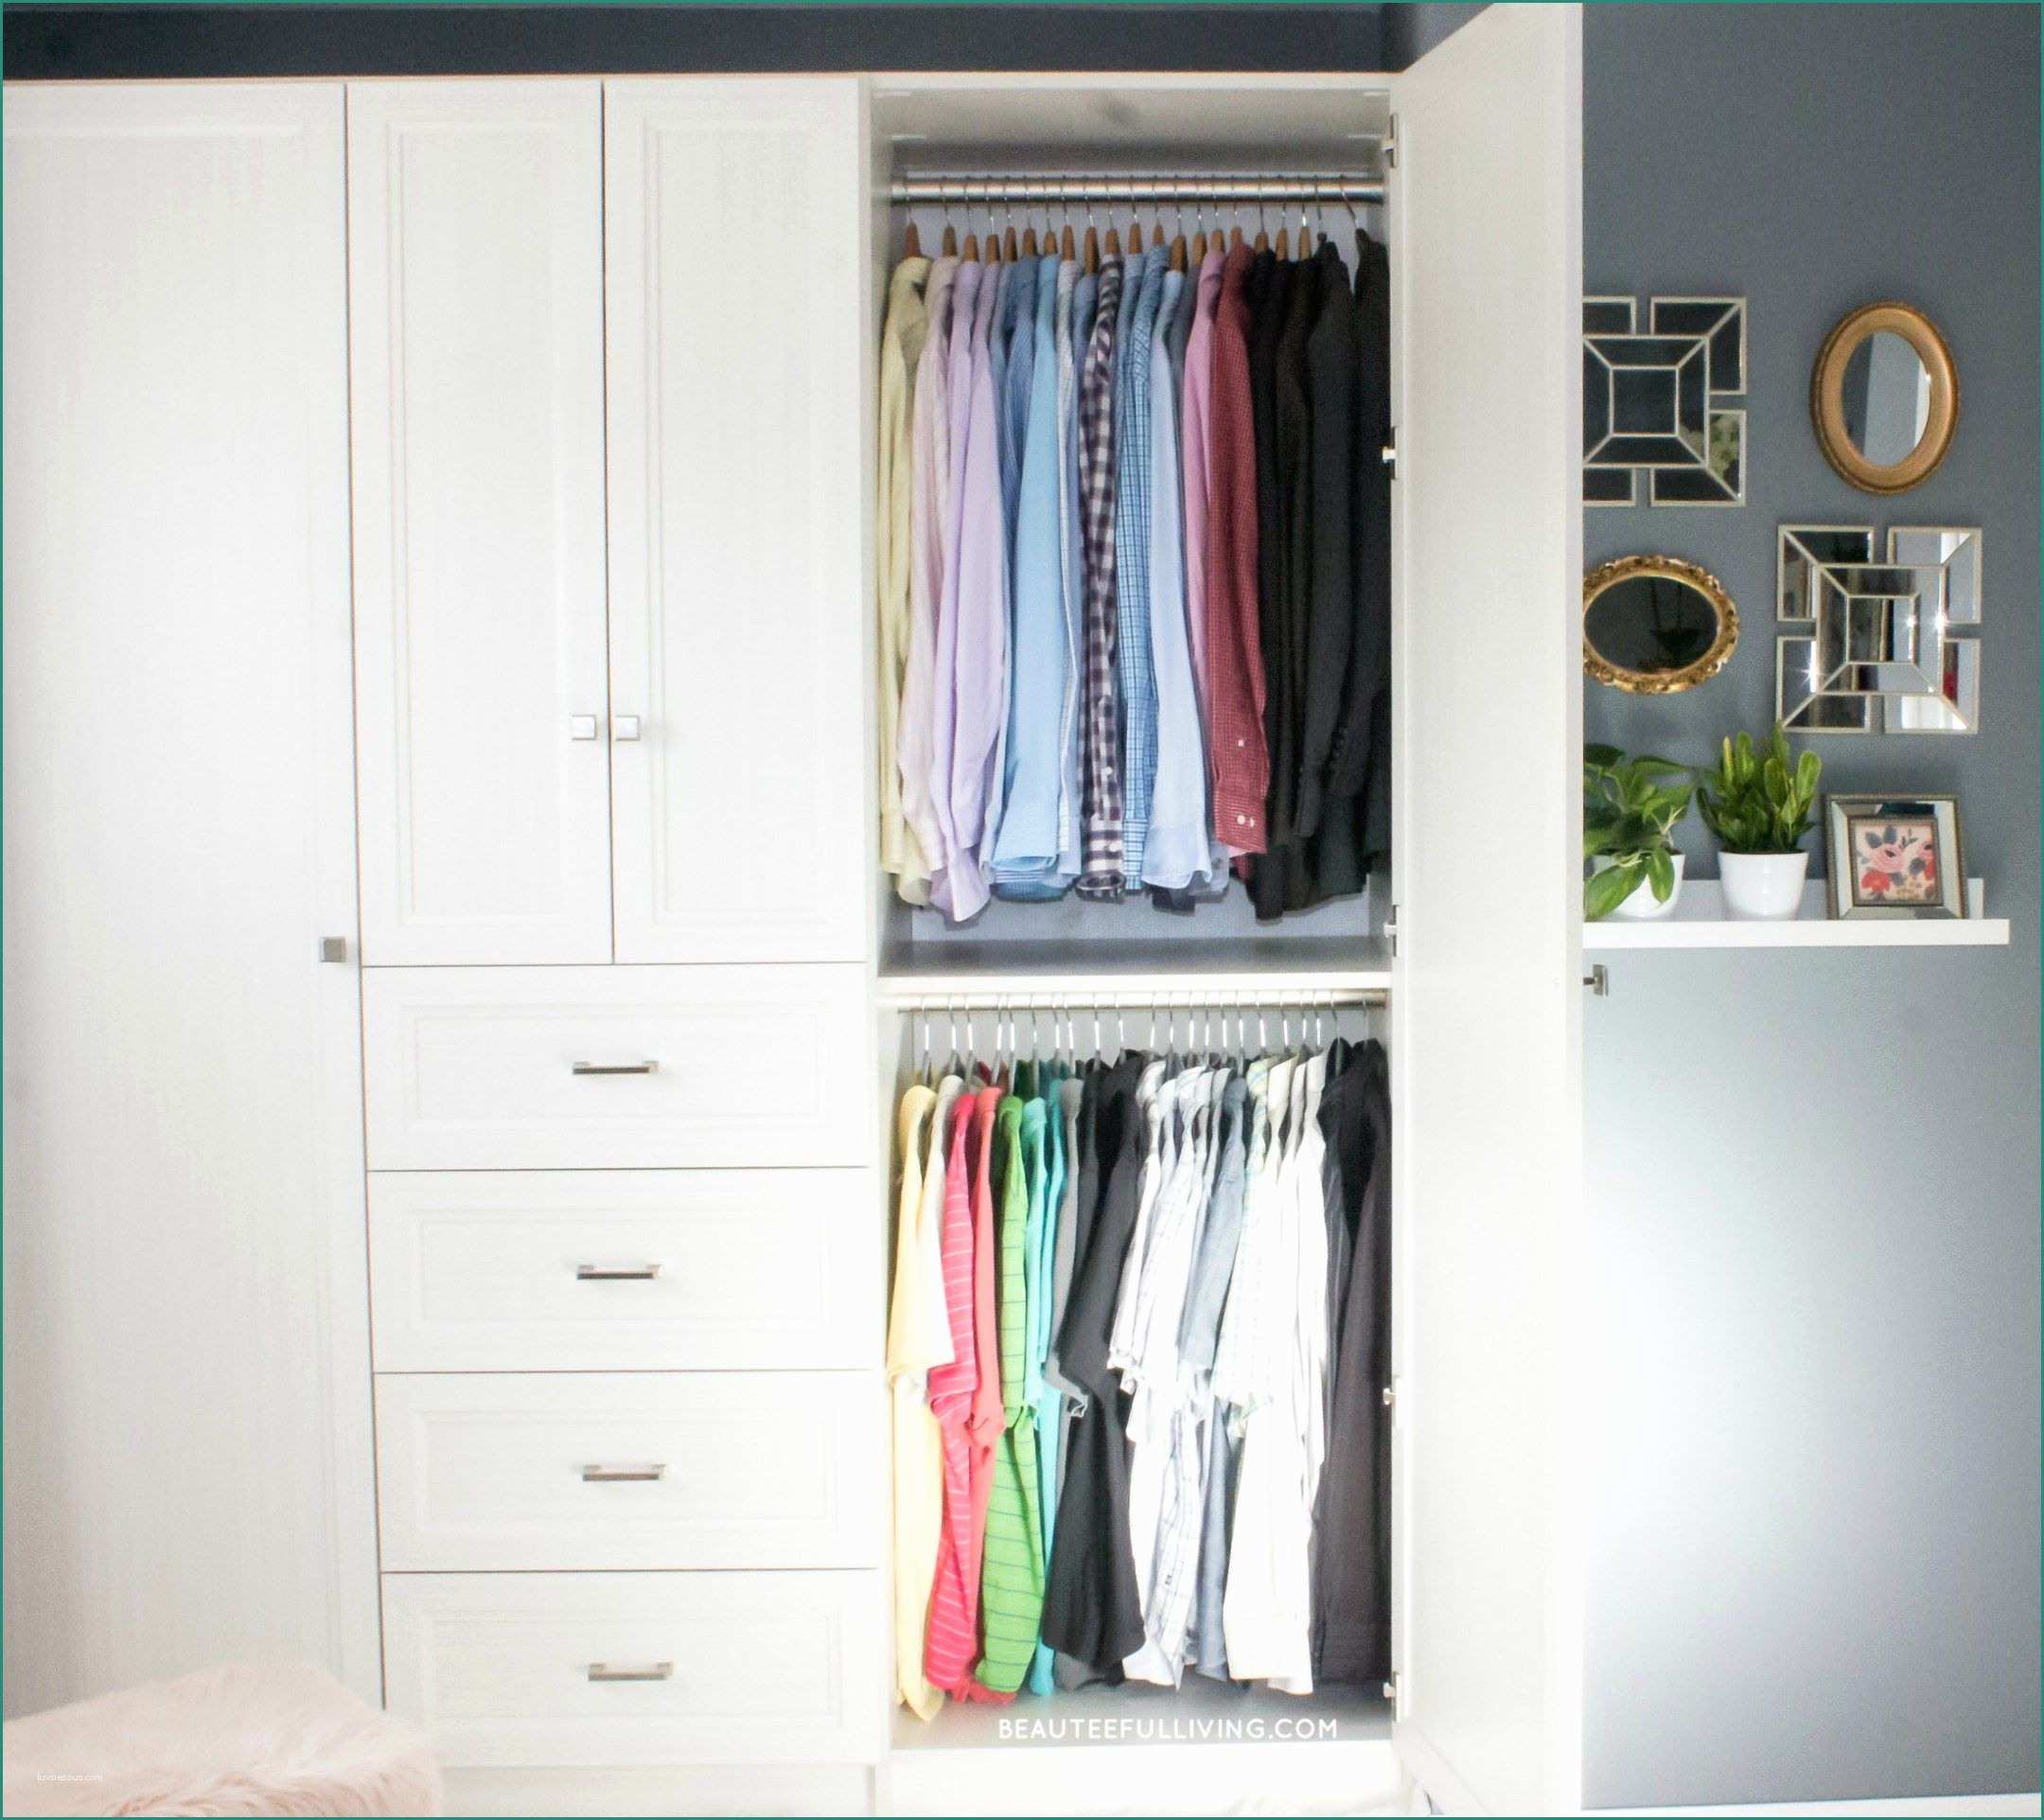 Custom Closet Armoire Installation – Before and After